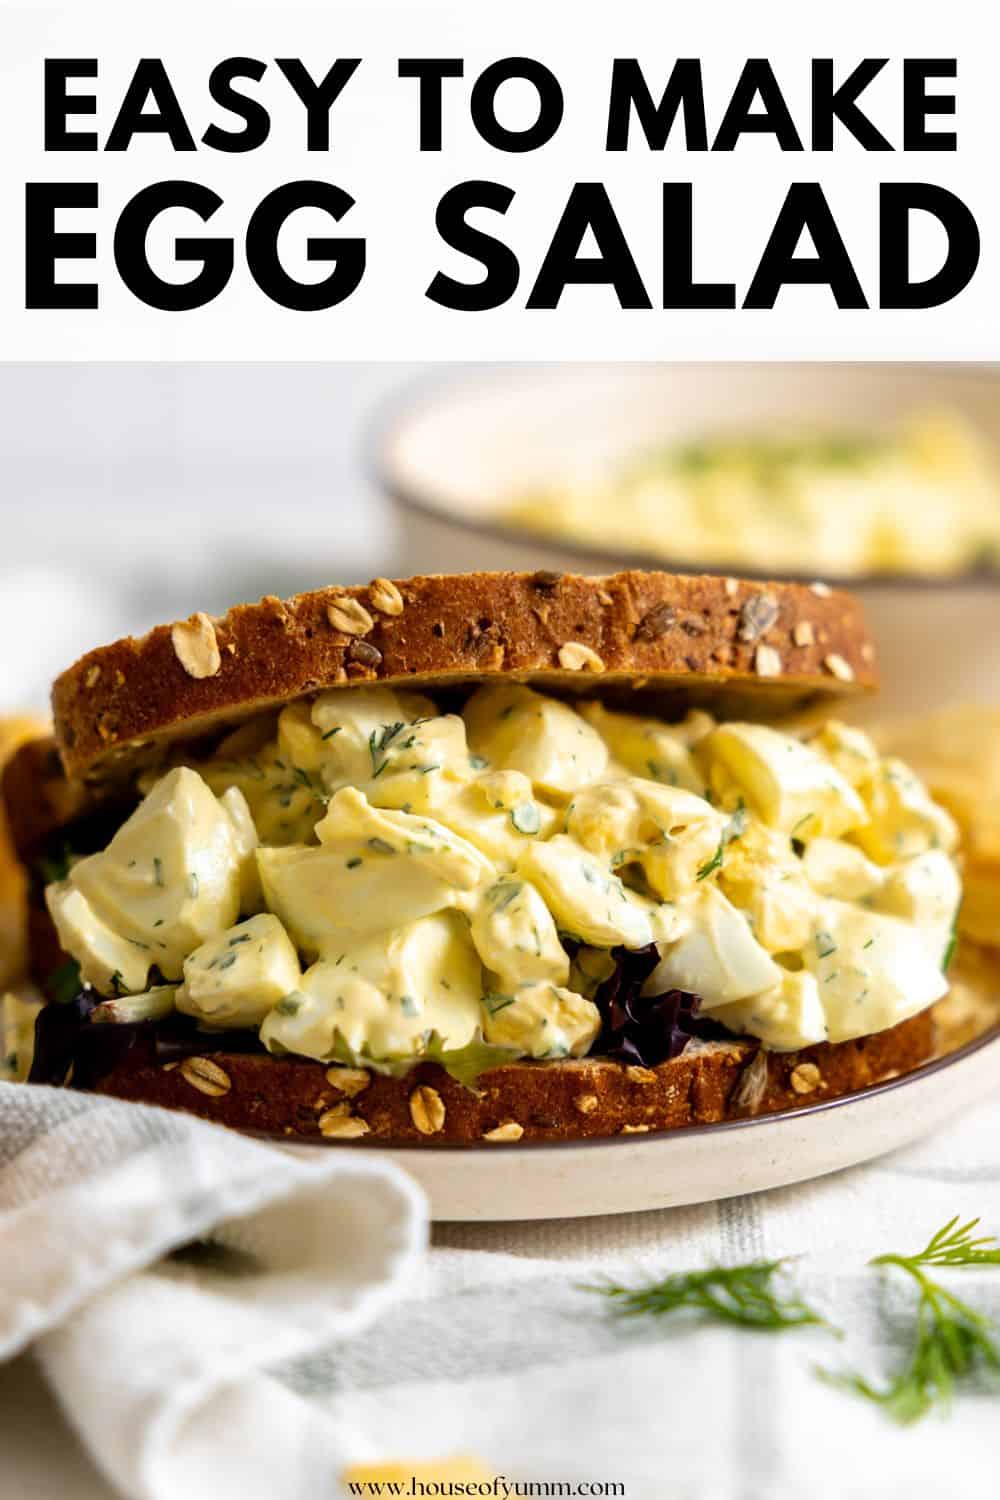 Egg Salad on a sandwich with text.